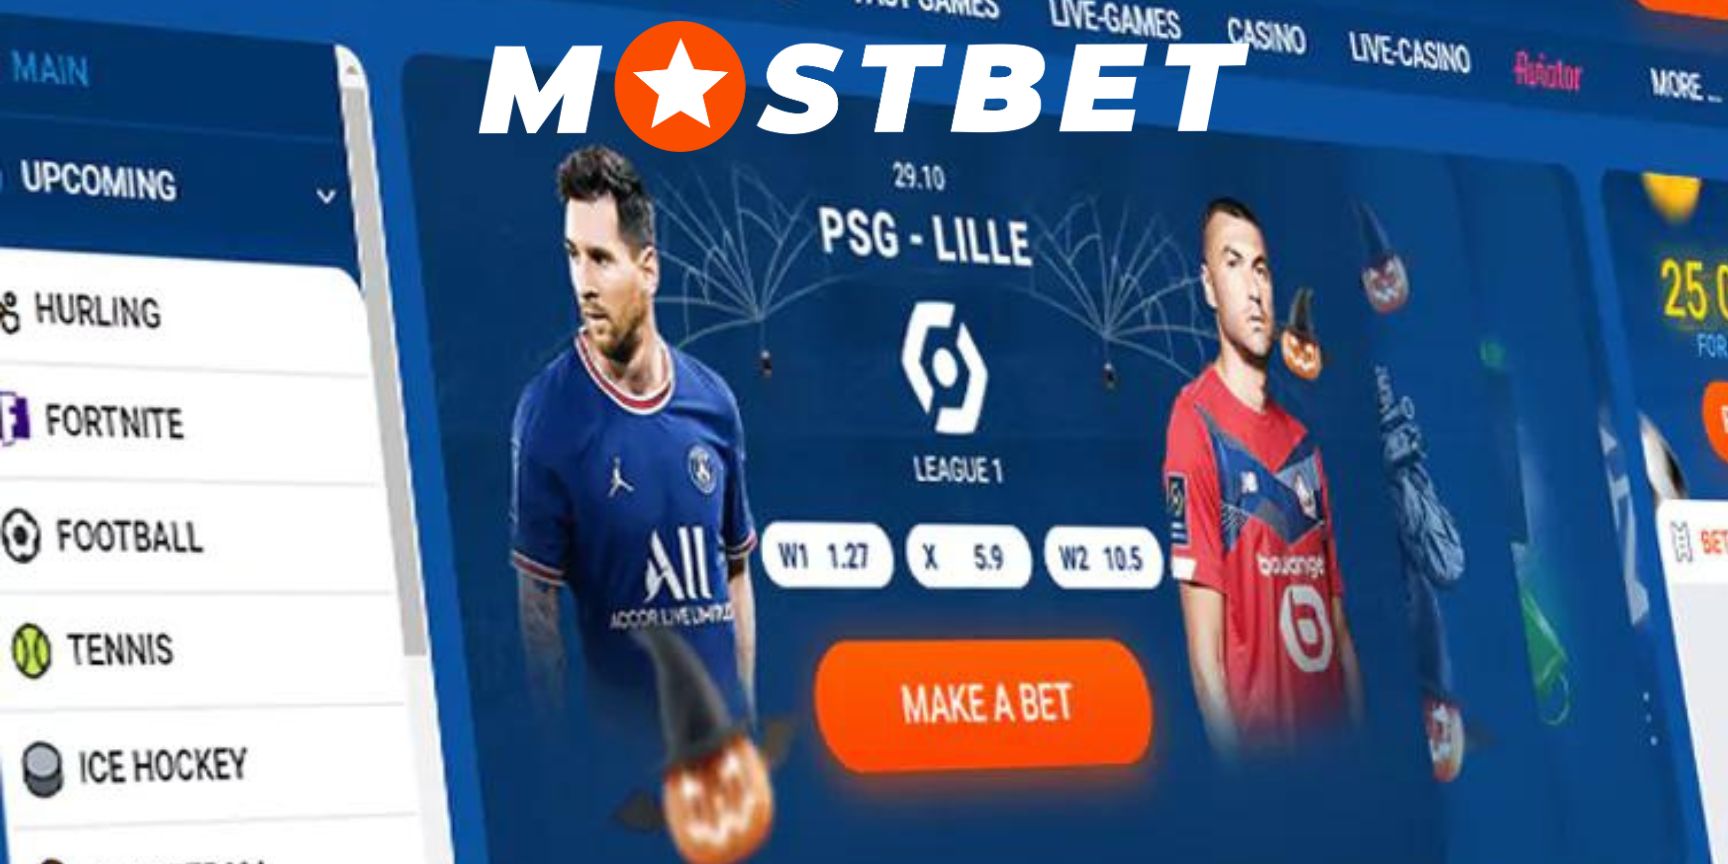 Mostbet official sports betting website review in India